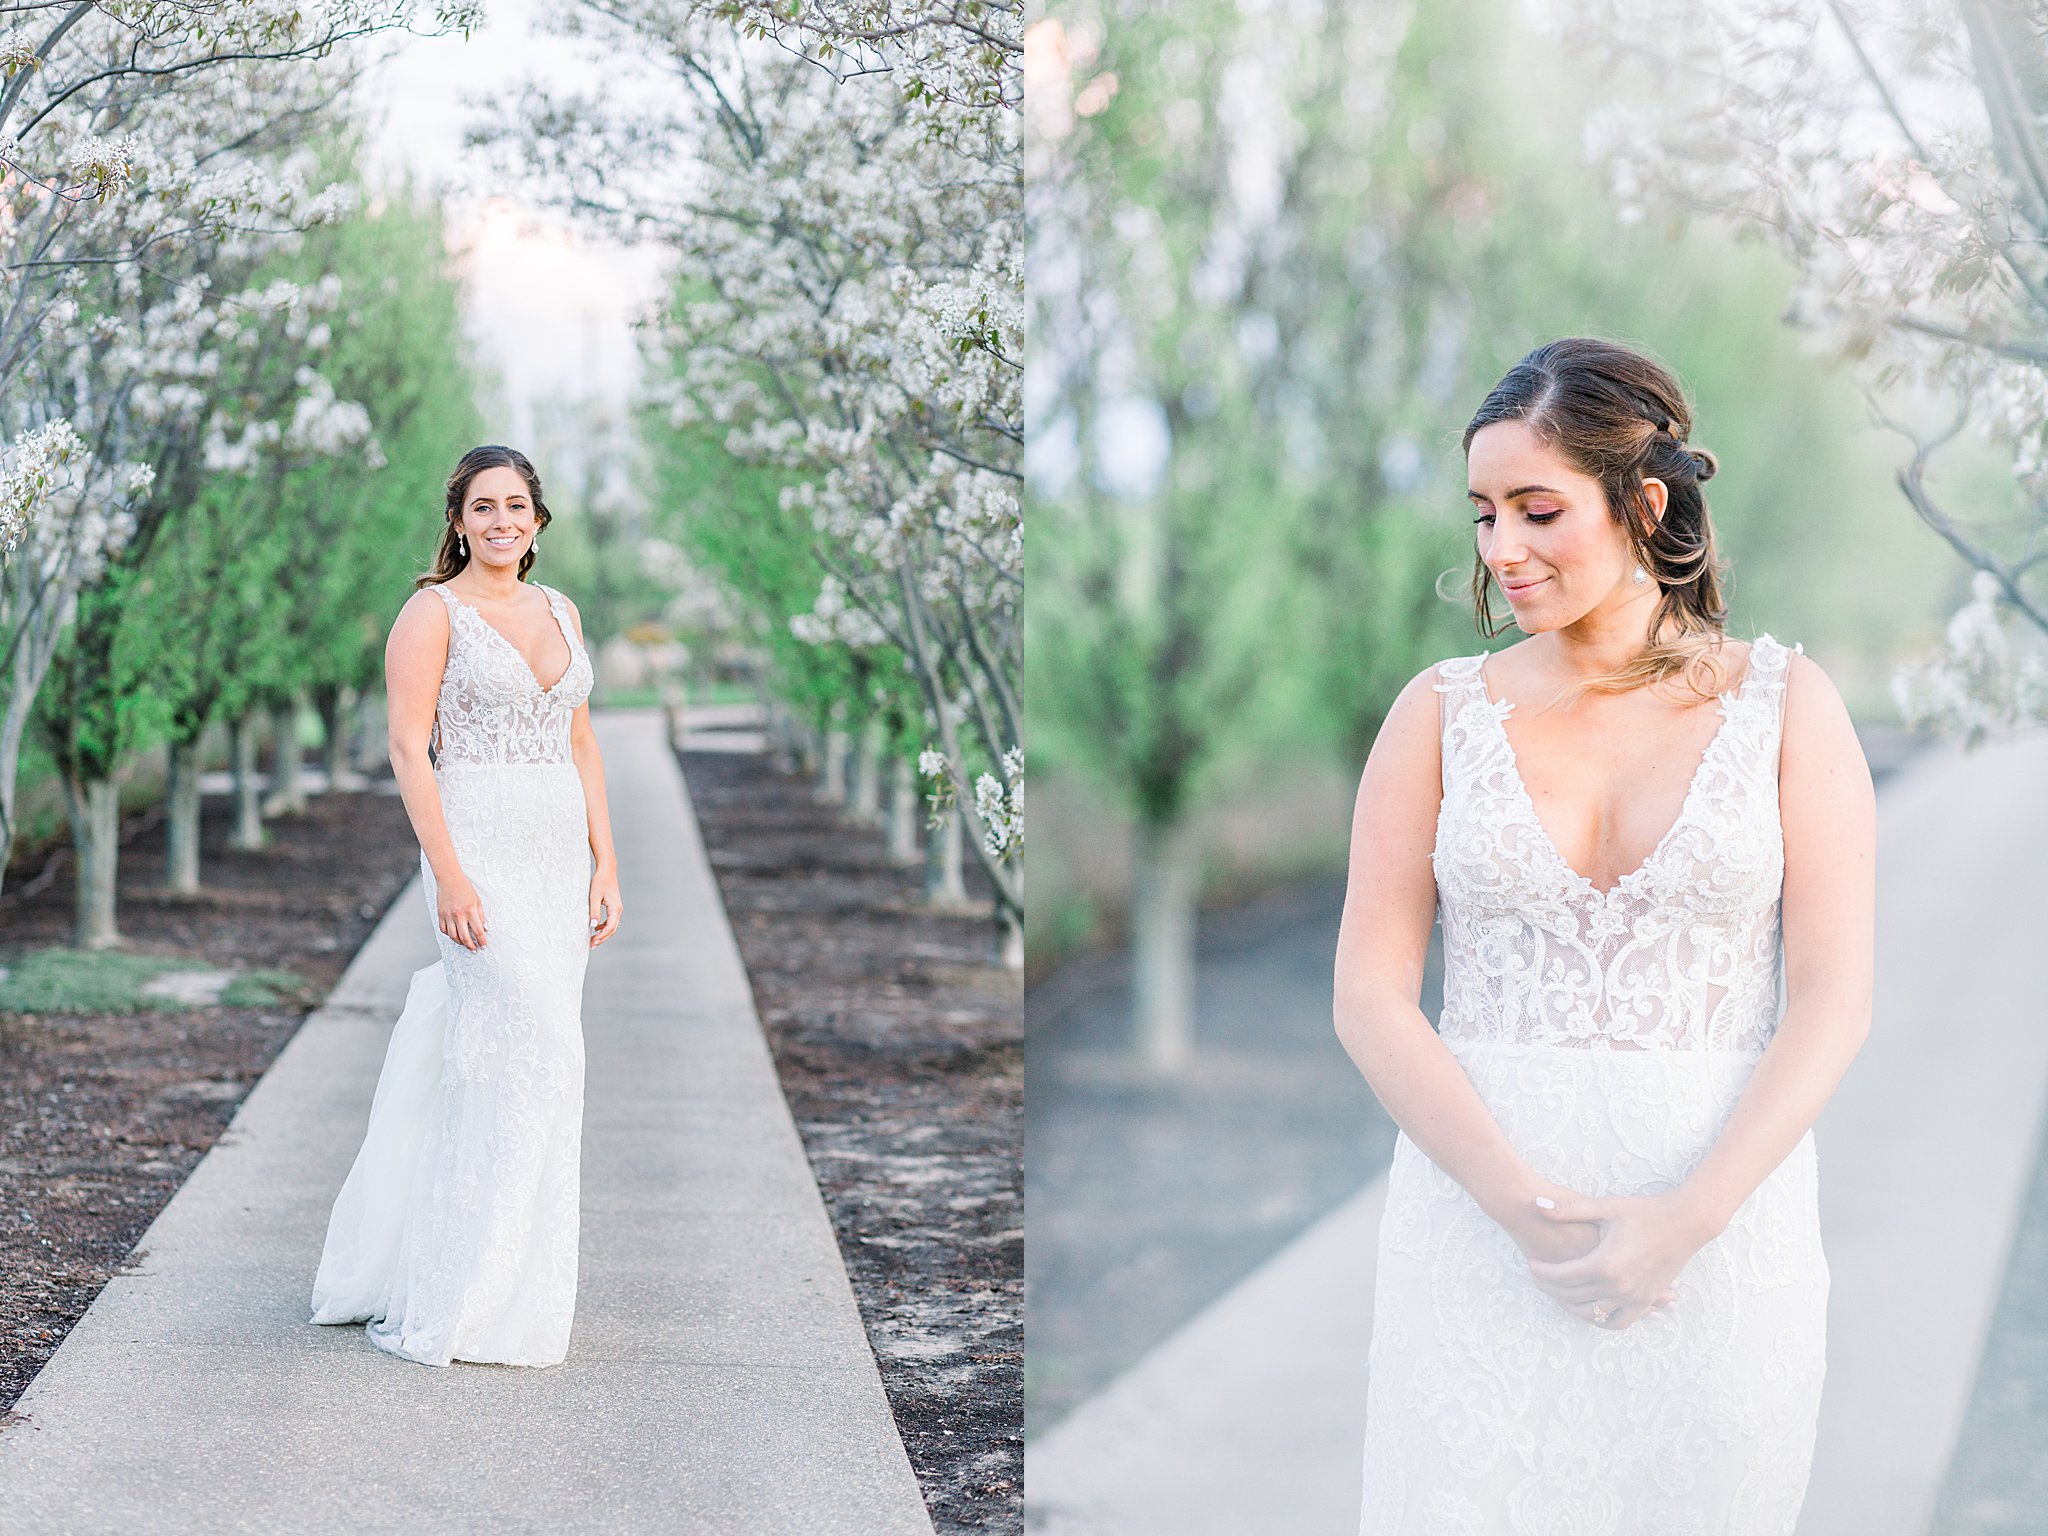 Bride portraits in the cherry blossoms during sunset for Spring Castle Farms wedding.